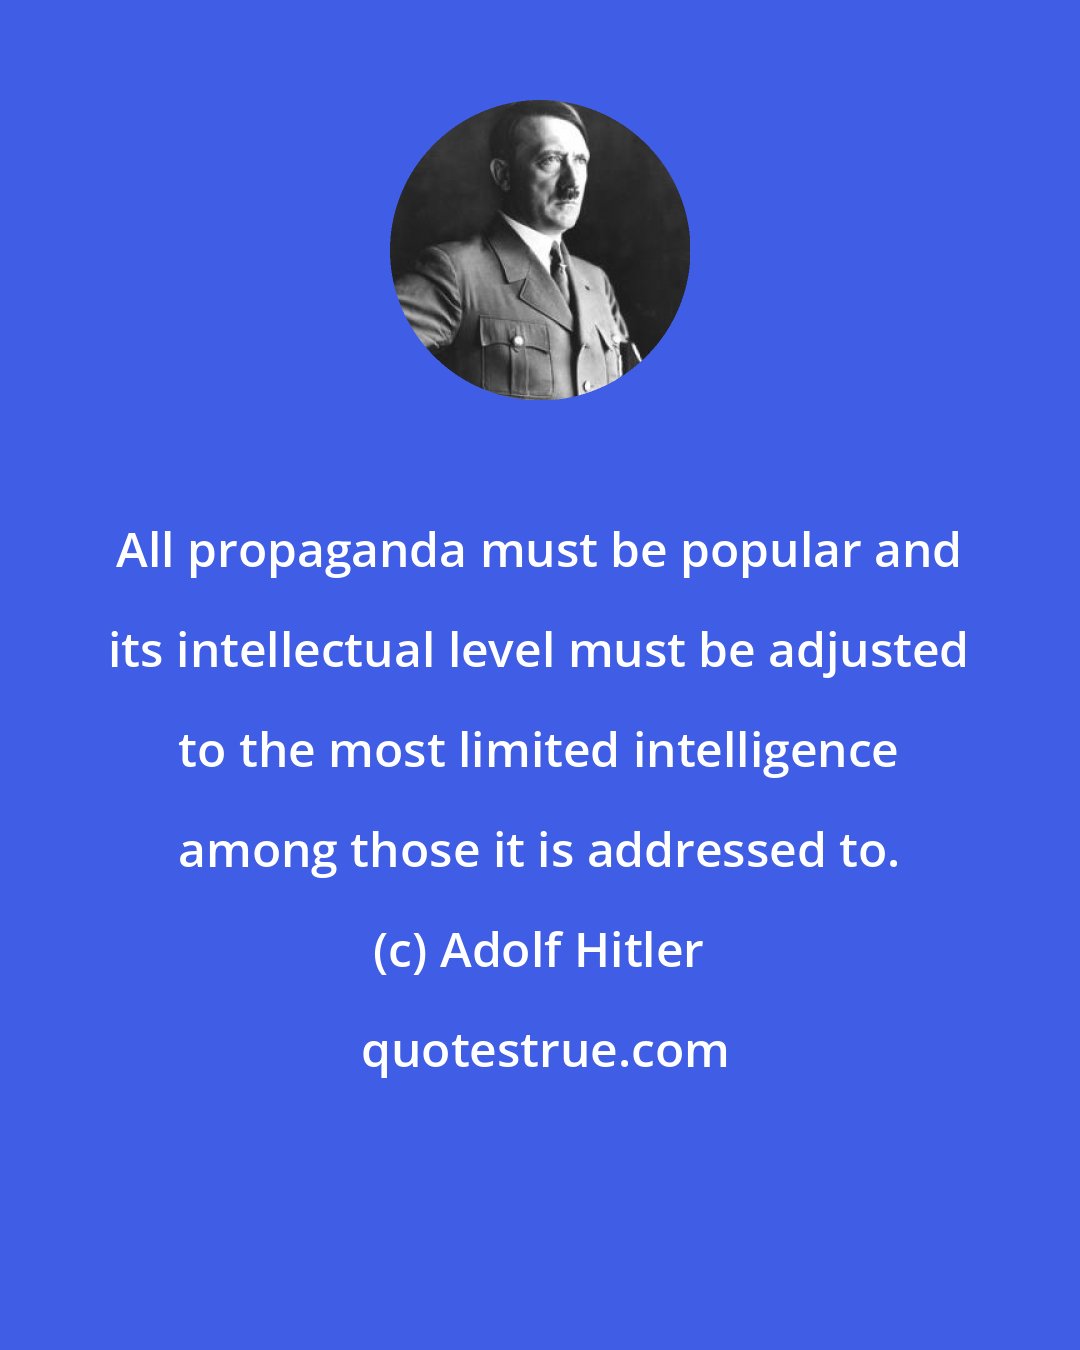 Adolf Hitler: All propaganda must be popular and its intellectual level must be adjusted to the most limited intelligence among those it is addressed to.